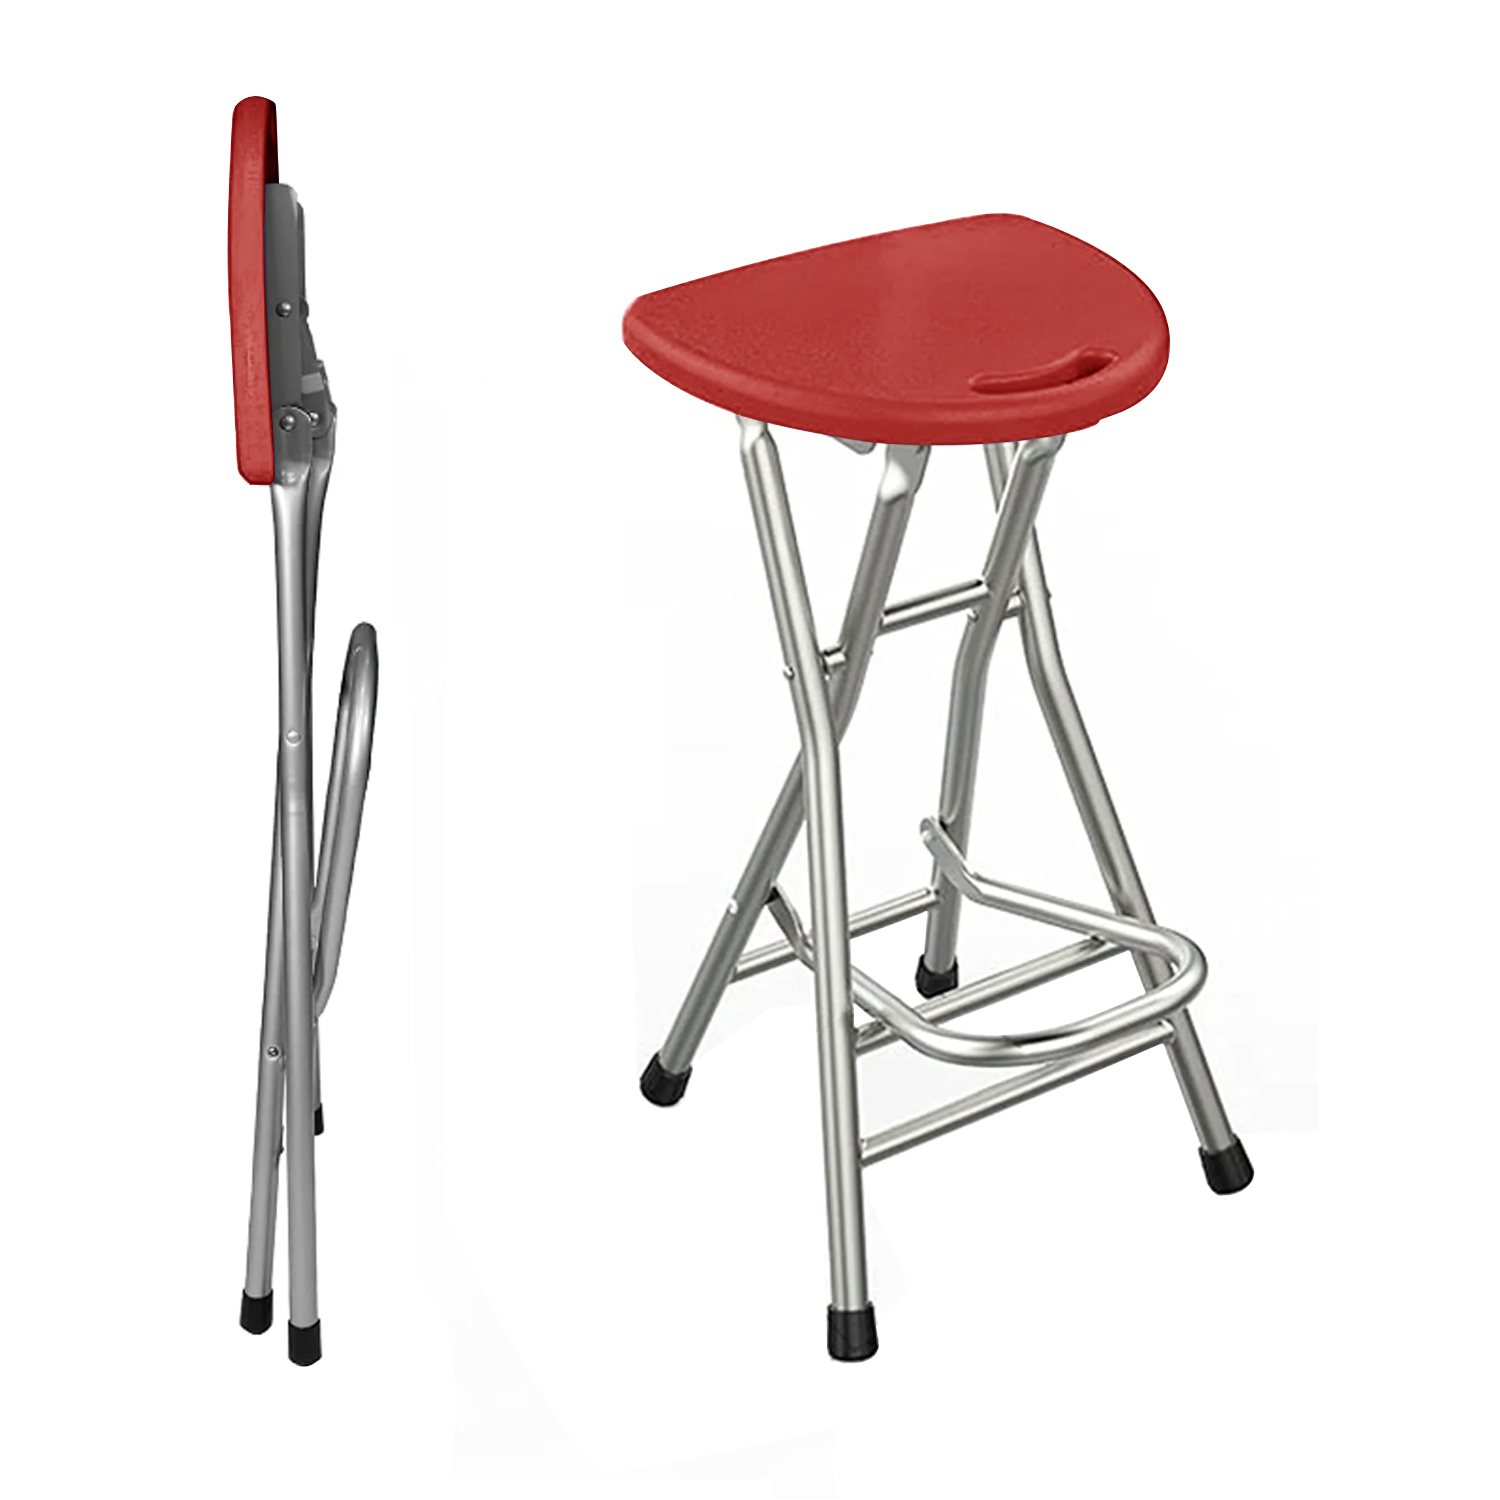 Portable Folding Stools for Adults Sturdy Folding Stool High Bar Stool with Handle Plastic Counter Stool for Kitchen And Outdoor